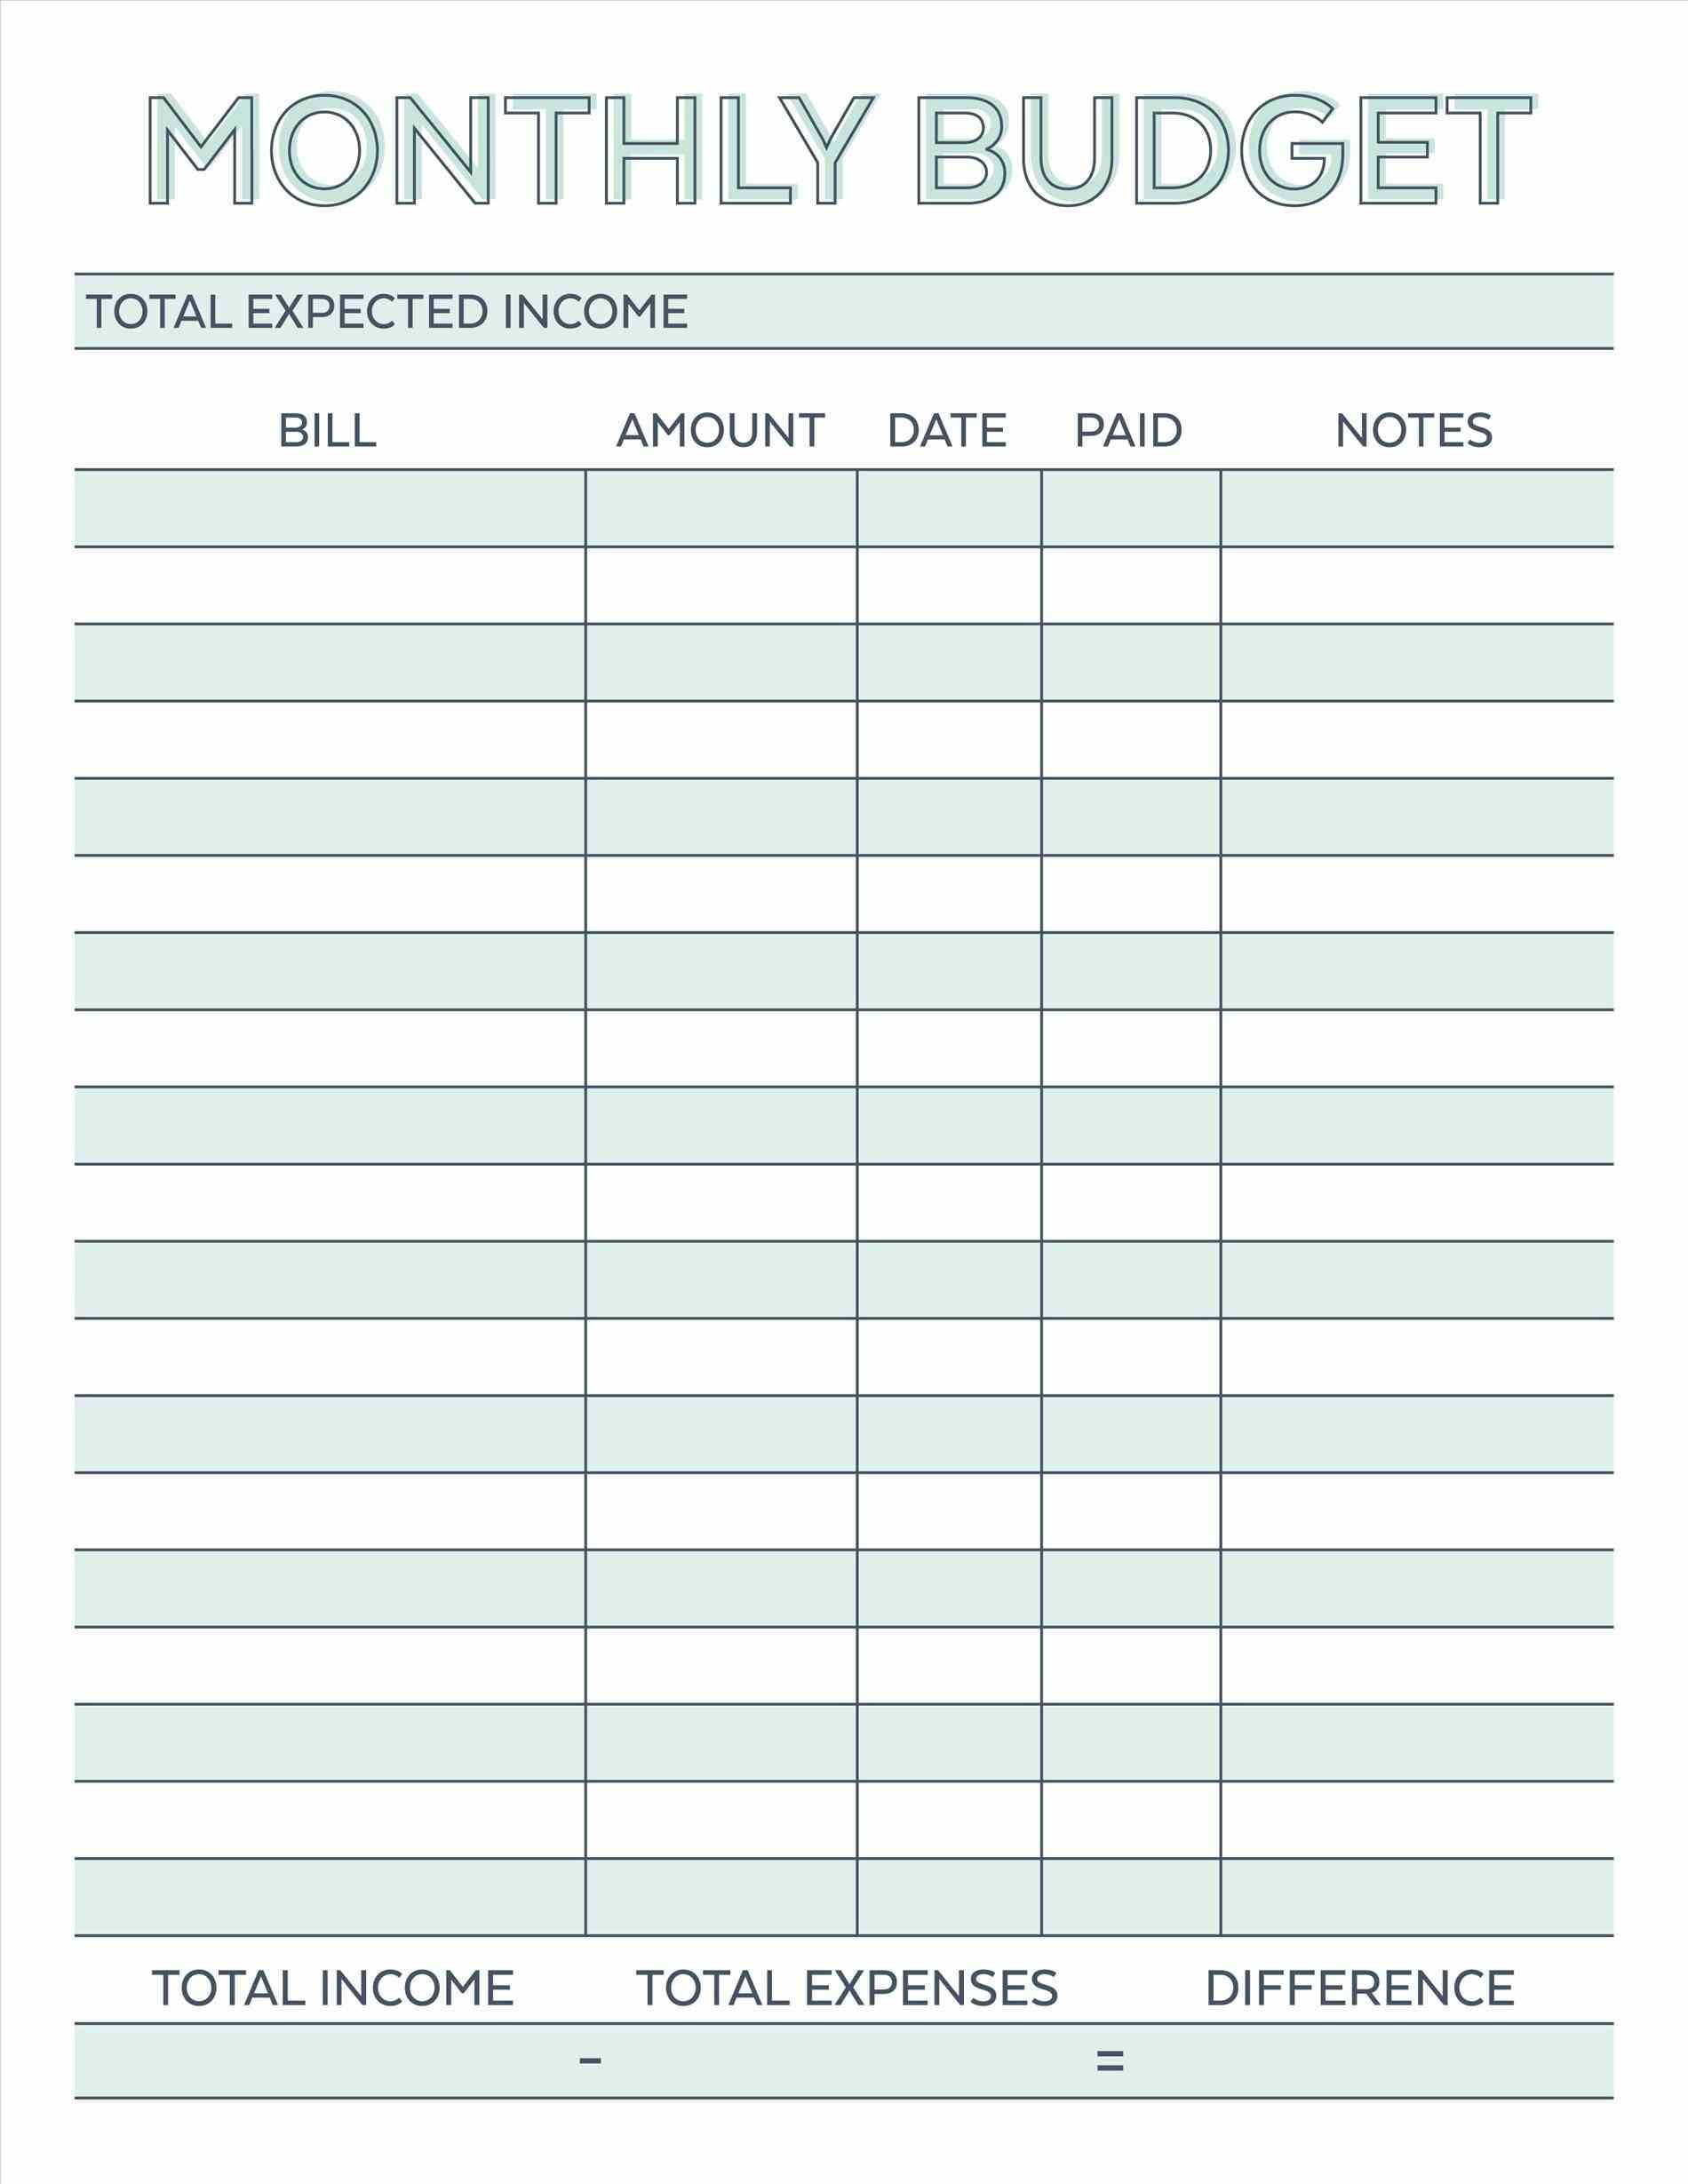 FREE Printable Budget Forms   Queen of Free